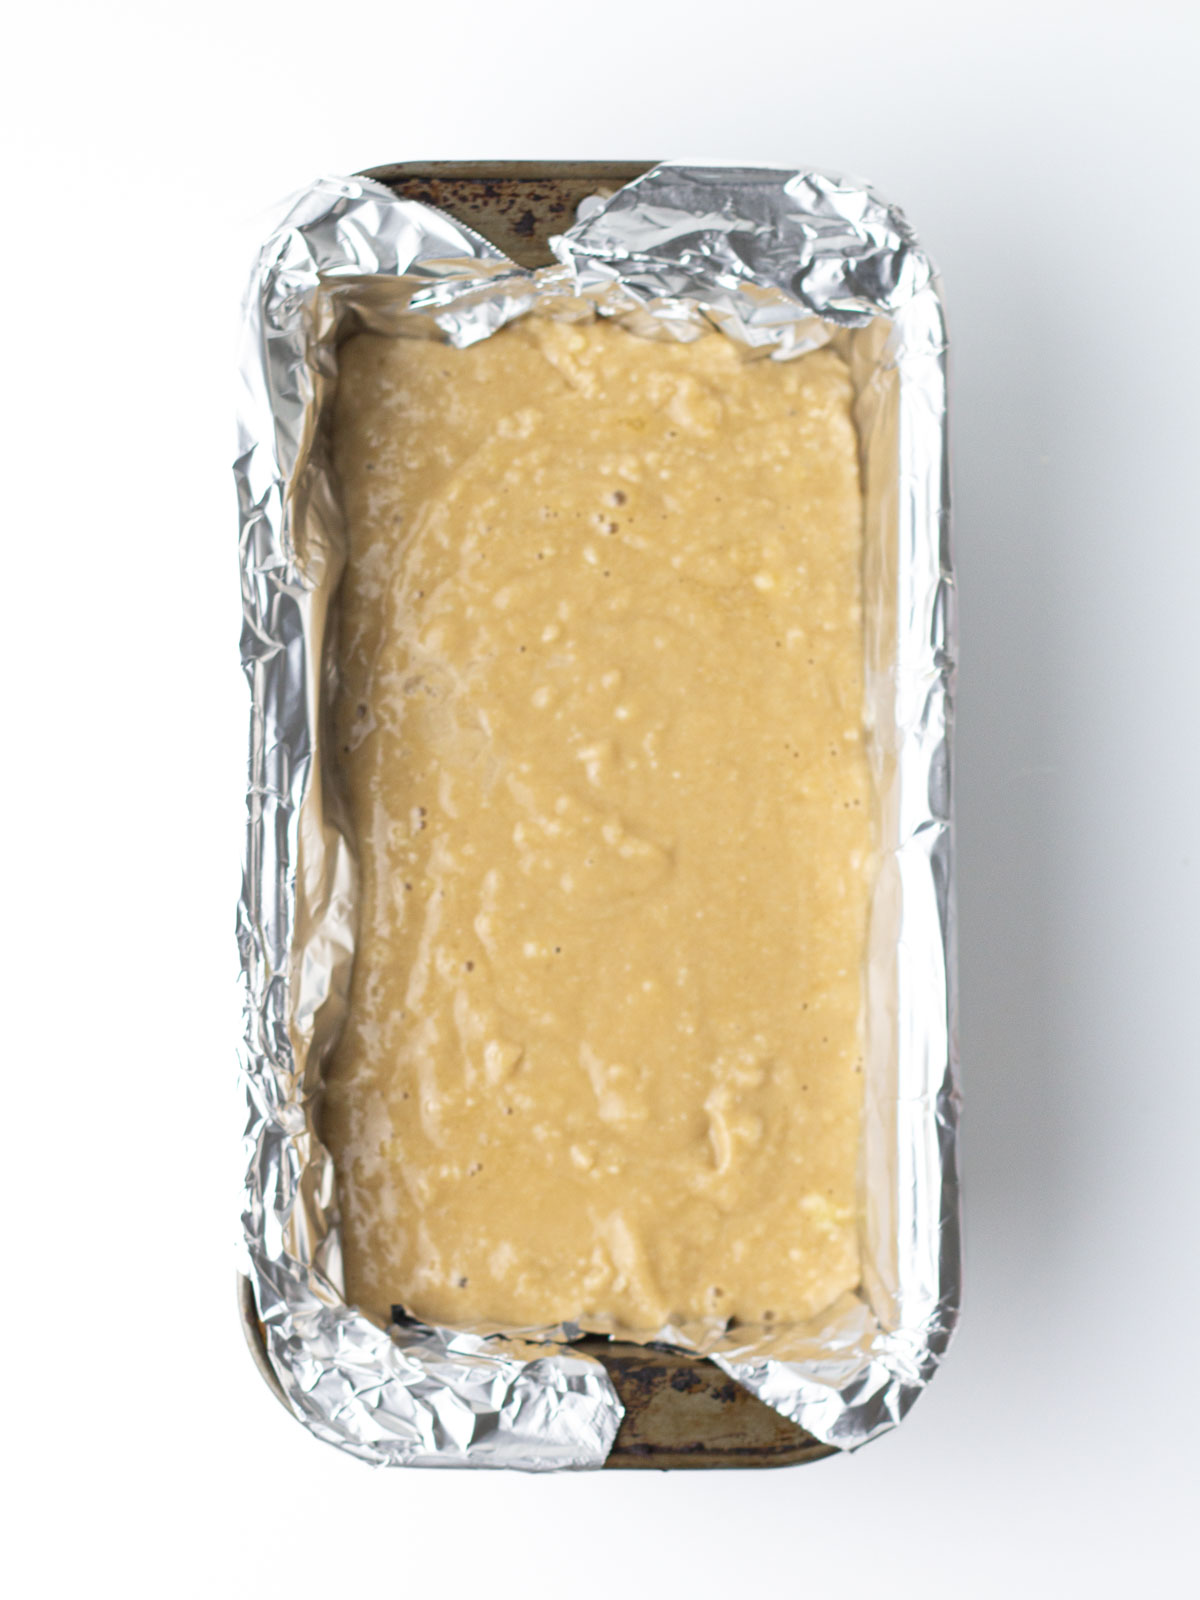 Chai bread batter in the foil lined metal loaf pan.